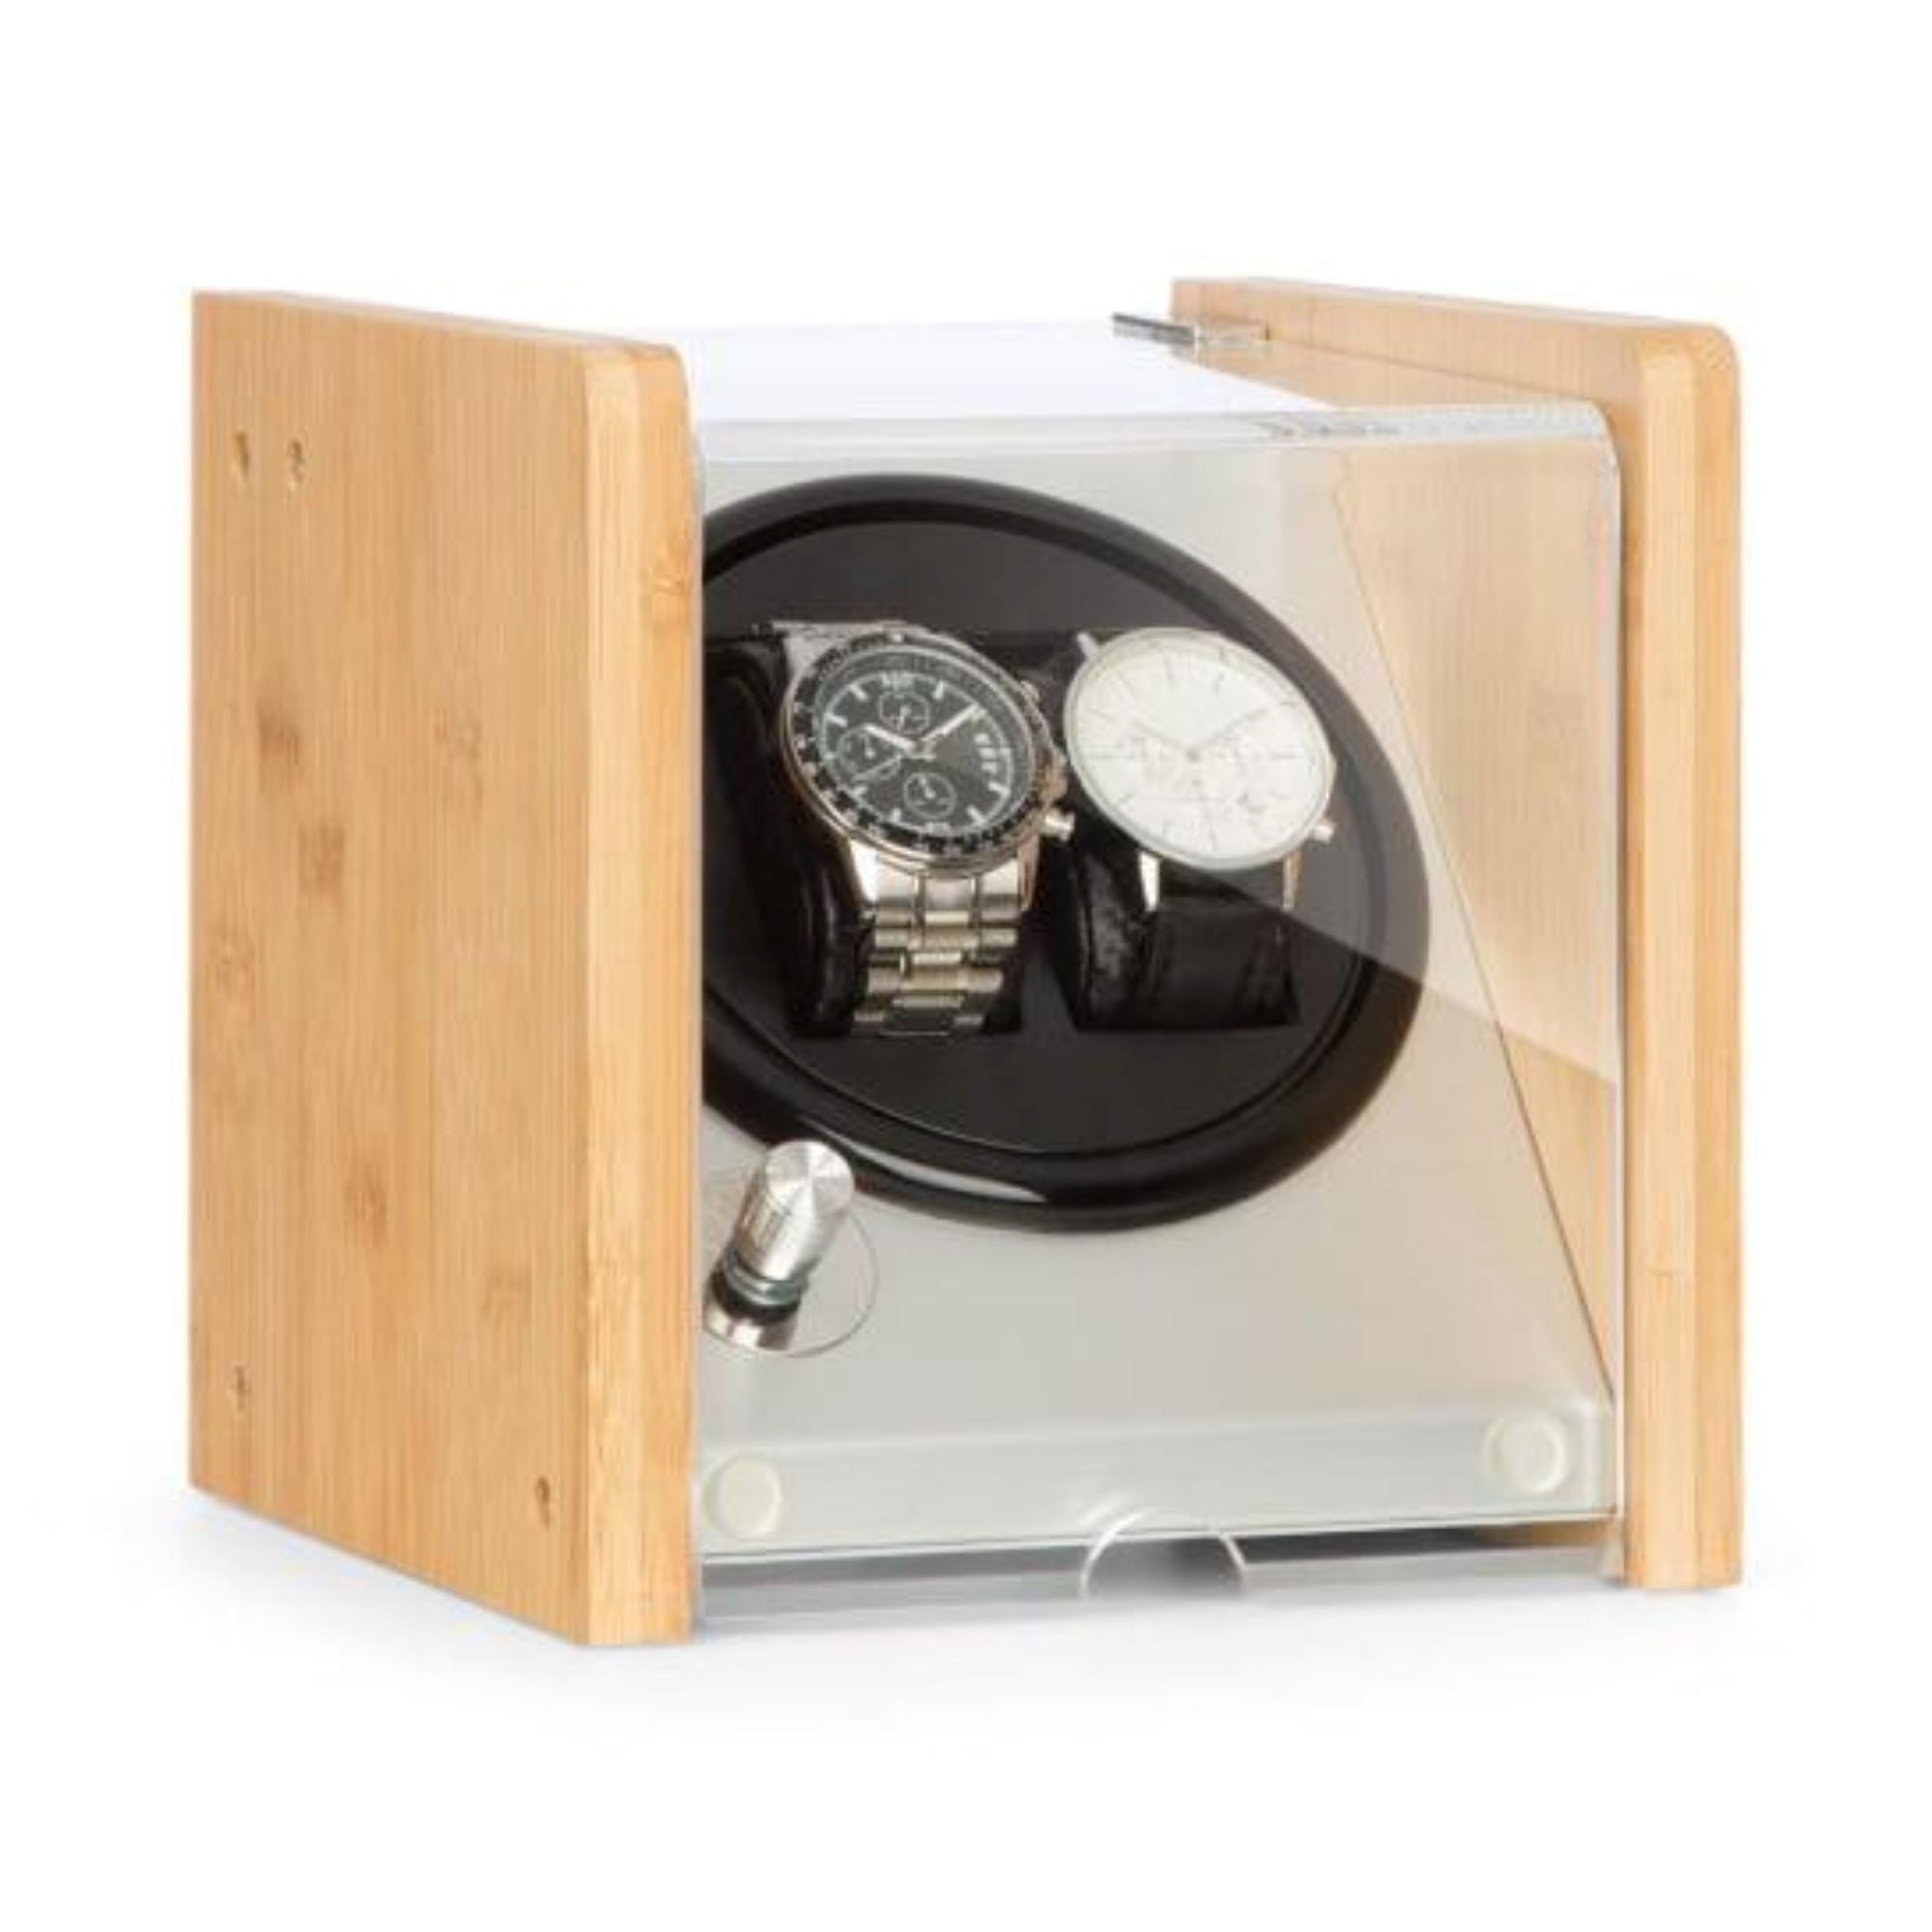 BLAQ Watch Winder Box 2 Watches in Aluminum & Bamboo Watch Winder Boxes Clinks 